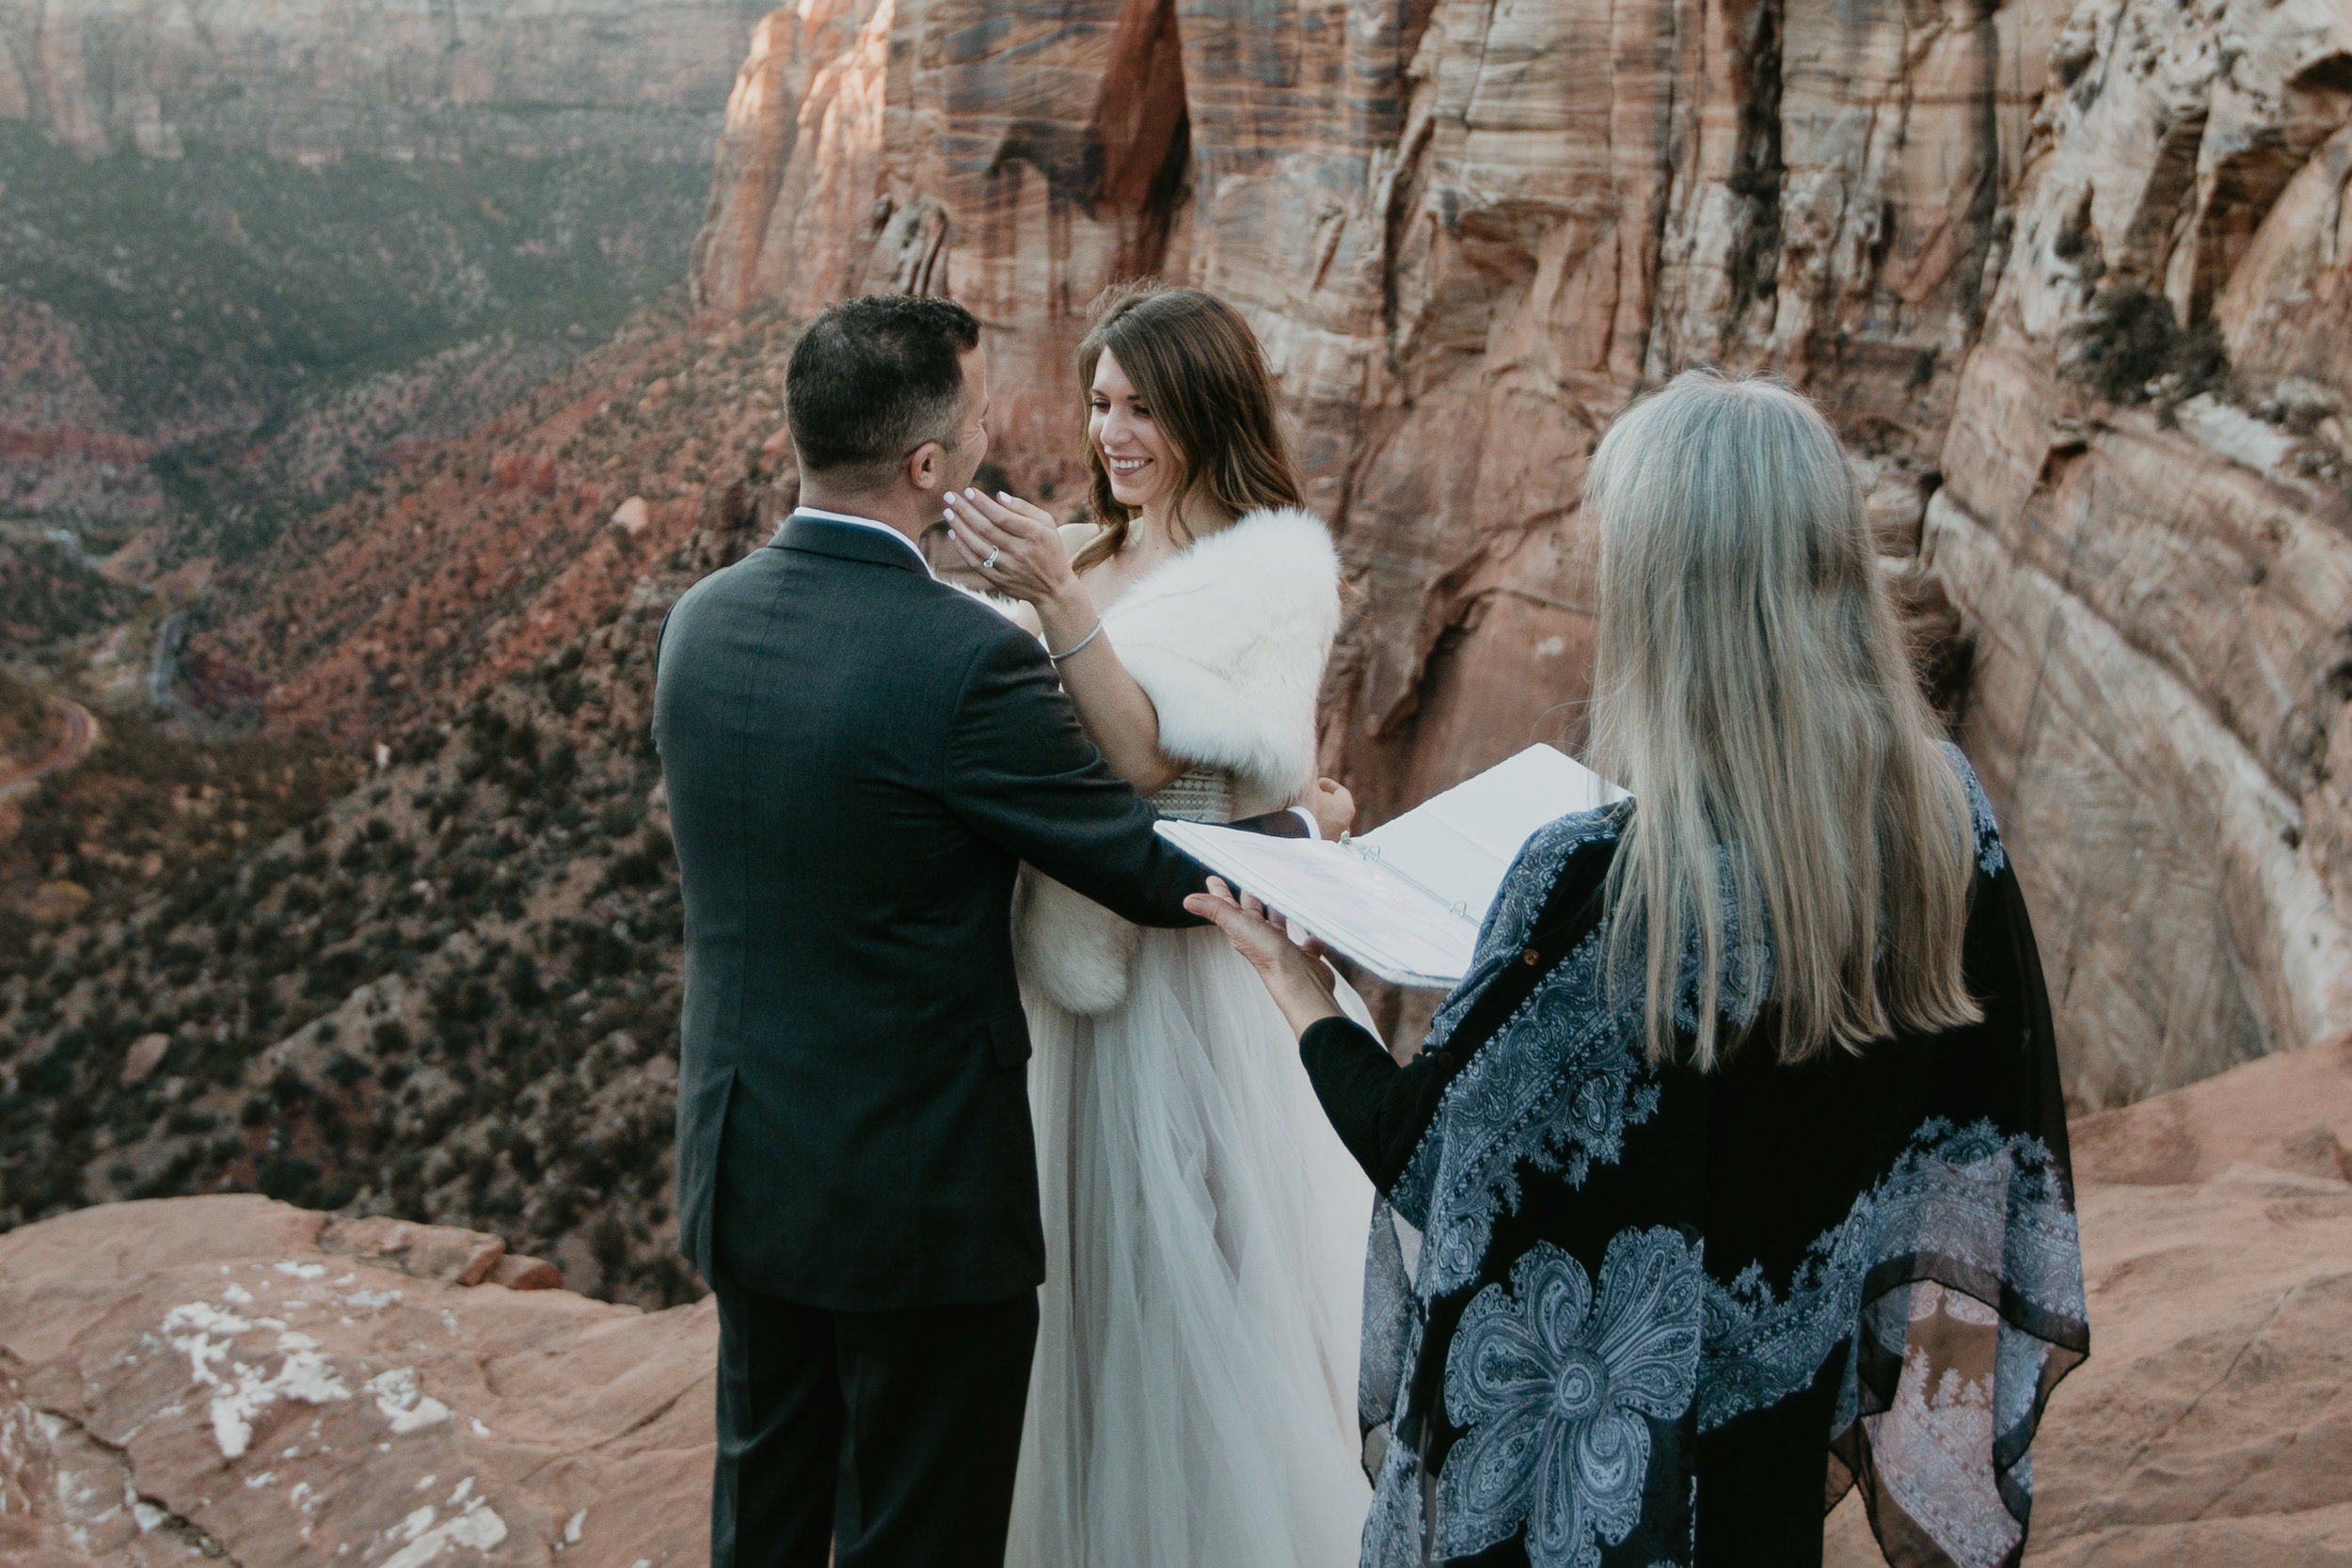 nicole-daacke-photography-zion-national-park-elopement-photographer-canyon-overlook-trail-elope-hiking-adventure-wedding-photos-fall-utah-red-rock-canyon-stgeorge-eloping-photographer-60.jpg